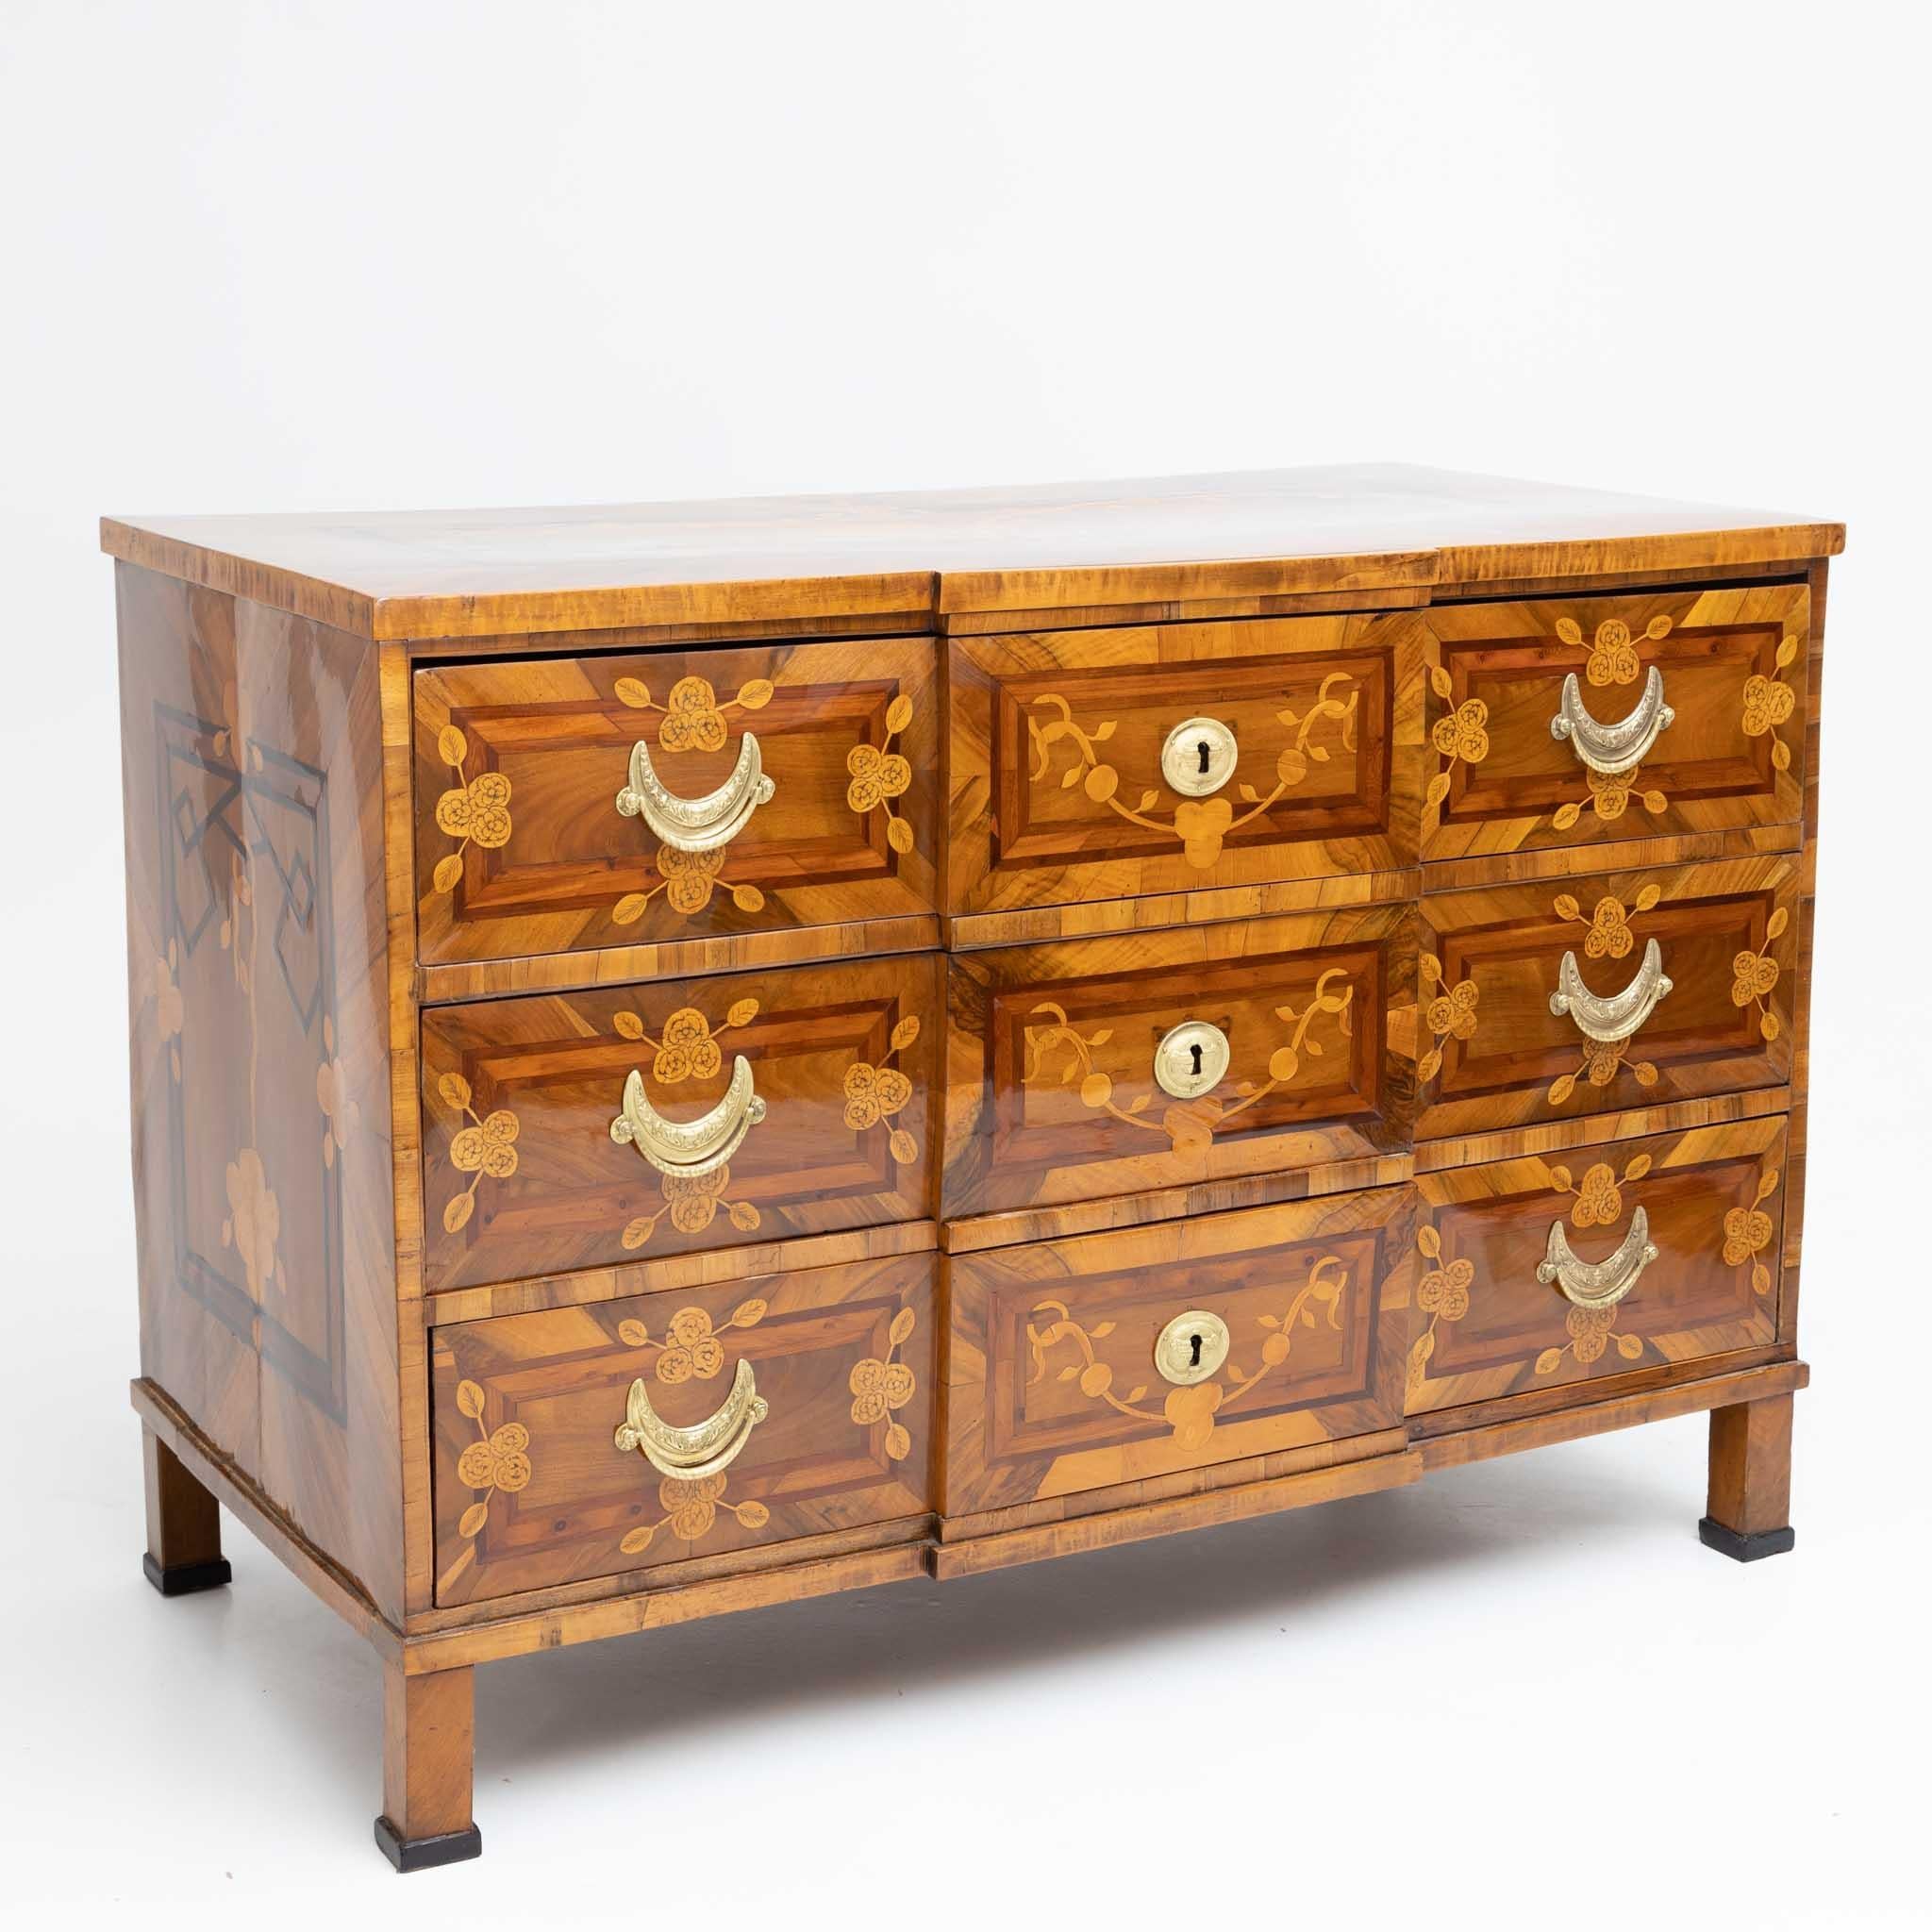 Louis Seize Marquetry Chest of Drawers, Walnut veneered, Late 18th Century For Sale 3